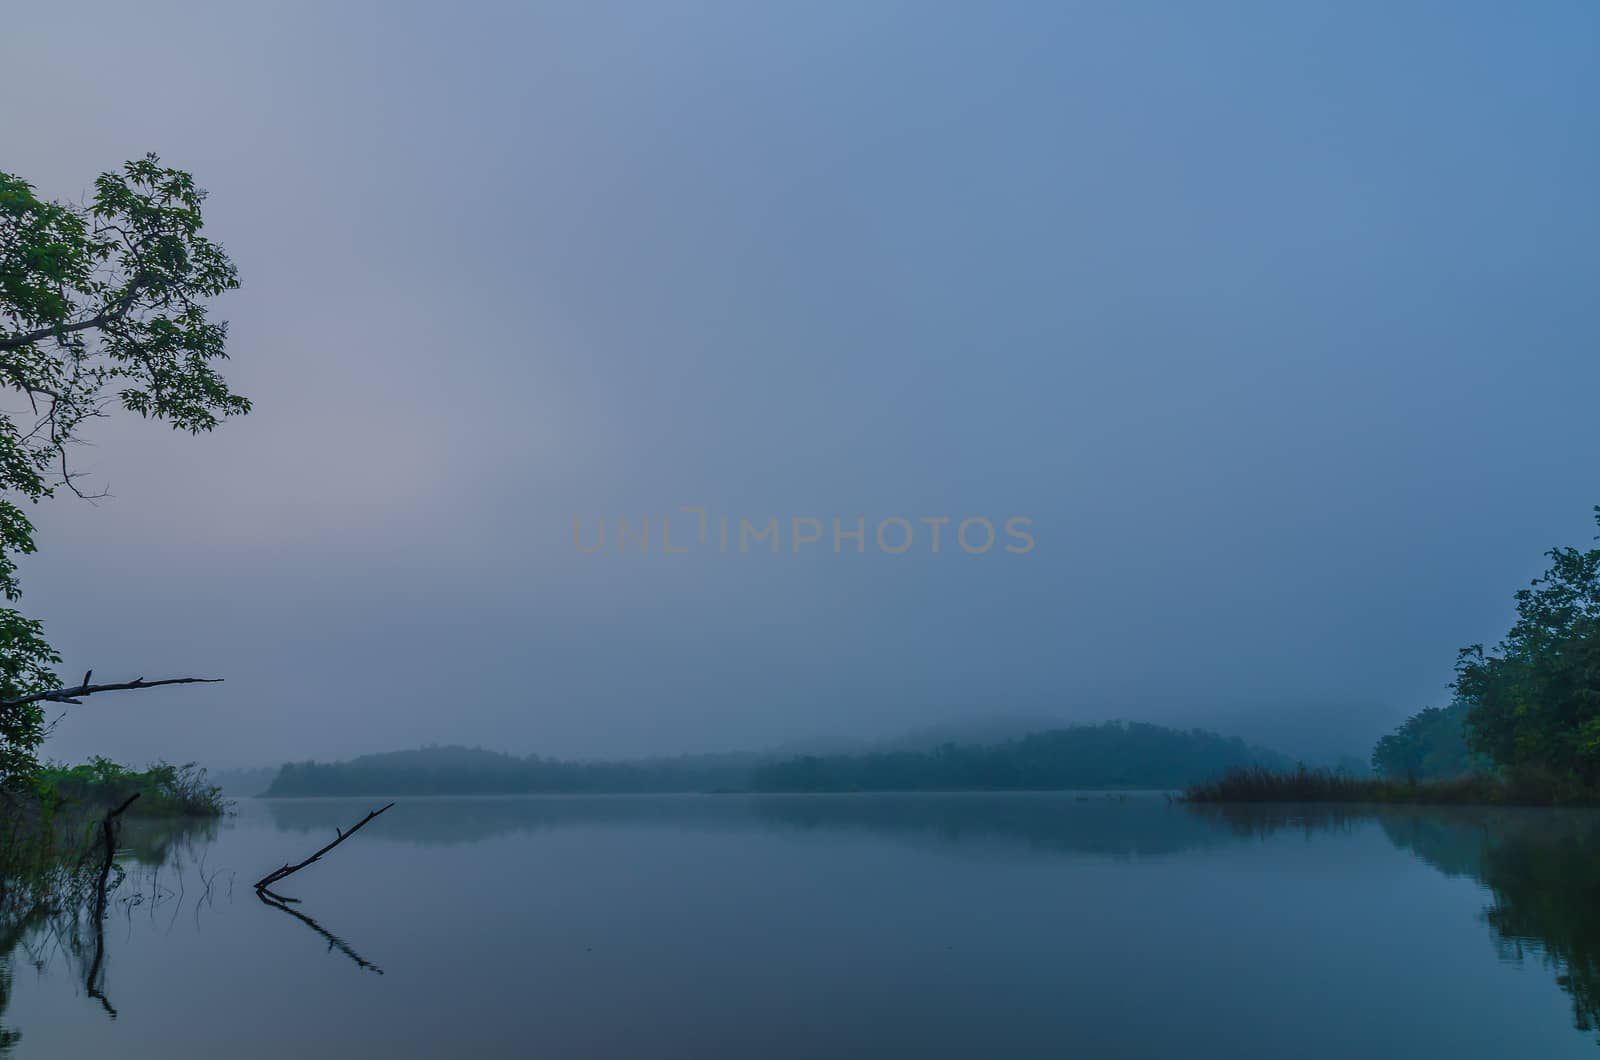 The lake in the morning with tranquil water and slight fog